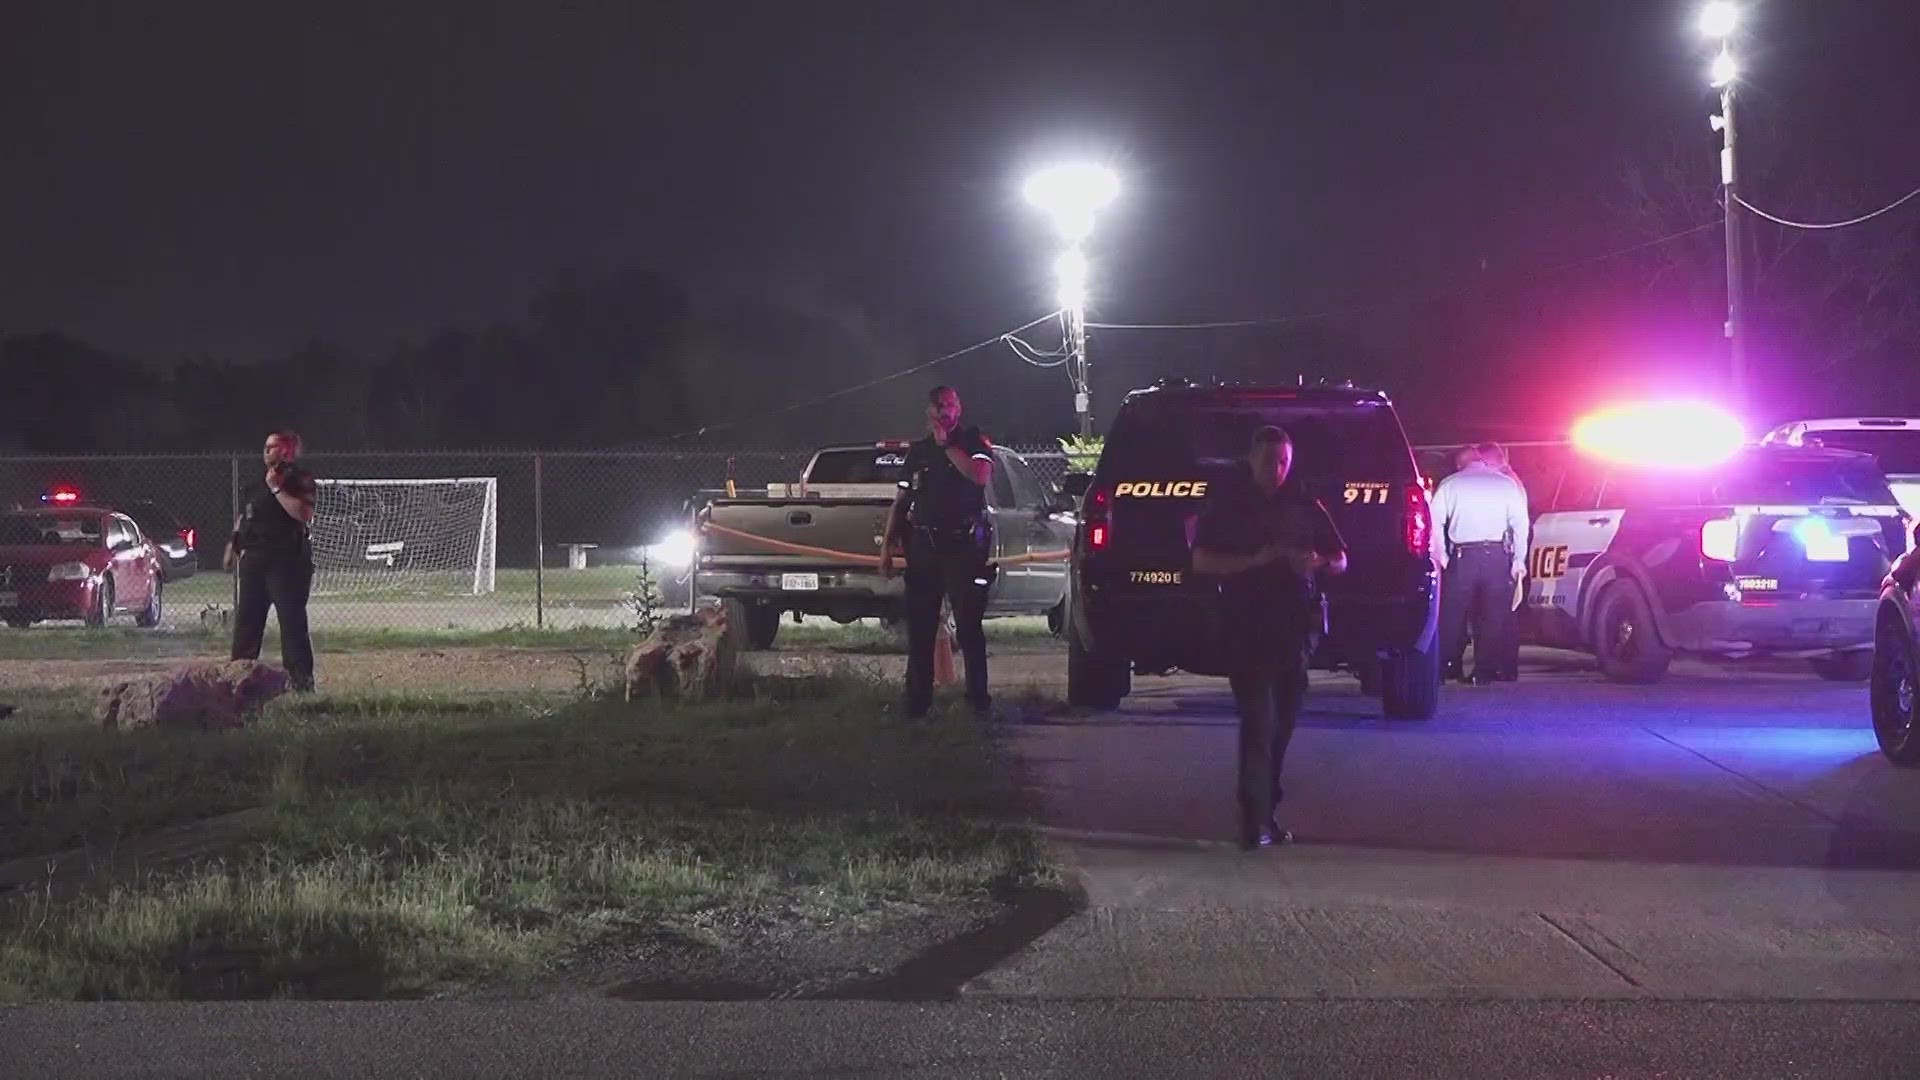 Police say an altercation took place between spectators of the soccer game and got physical between a group of individuals before the shooting.